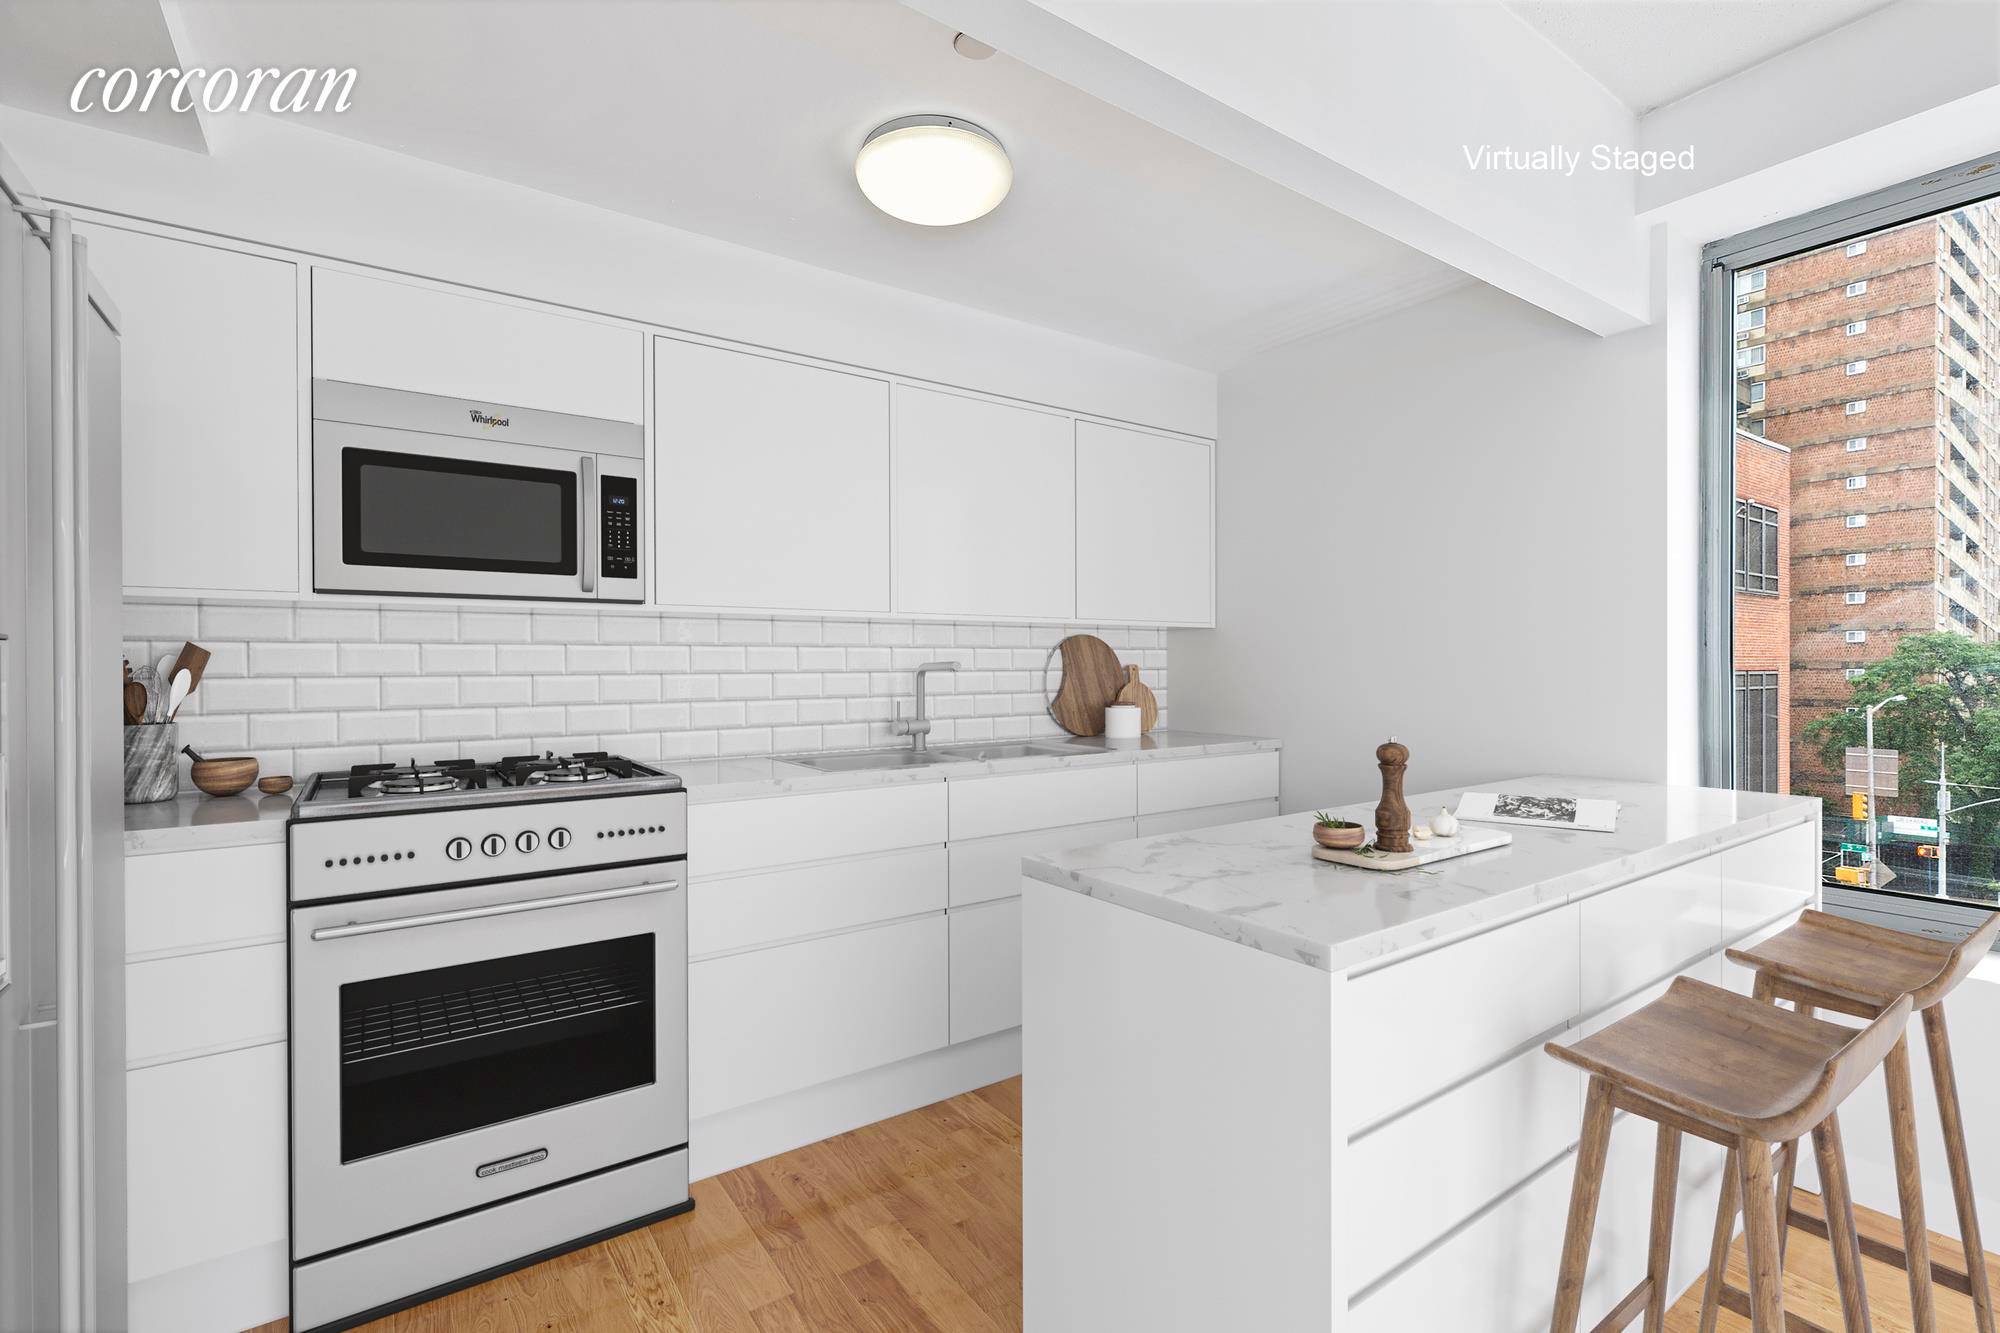 29 West 138th Street, 2A Beacon Towers 29 West 138th Street, 2A is a sun splashed, corner 2 bedroom located in one of the most fabulous luxury buildings in Central ...